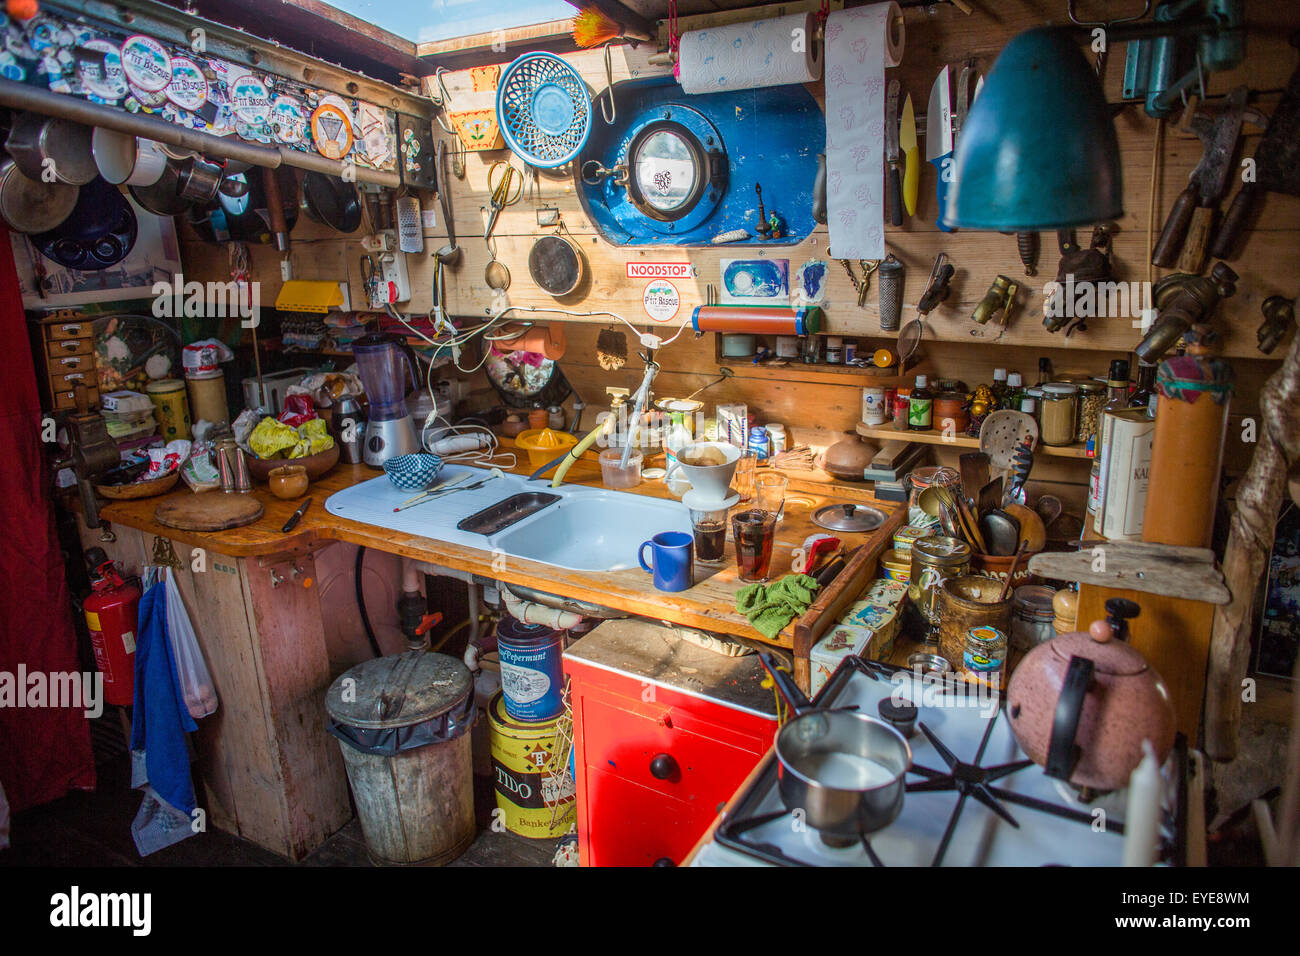 kitchen interior of a houseboat in Holland Stock Photo